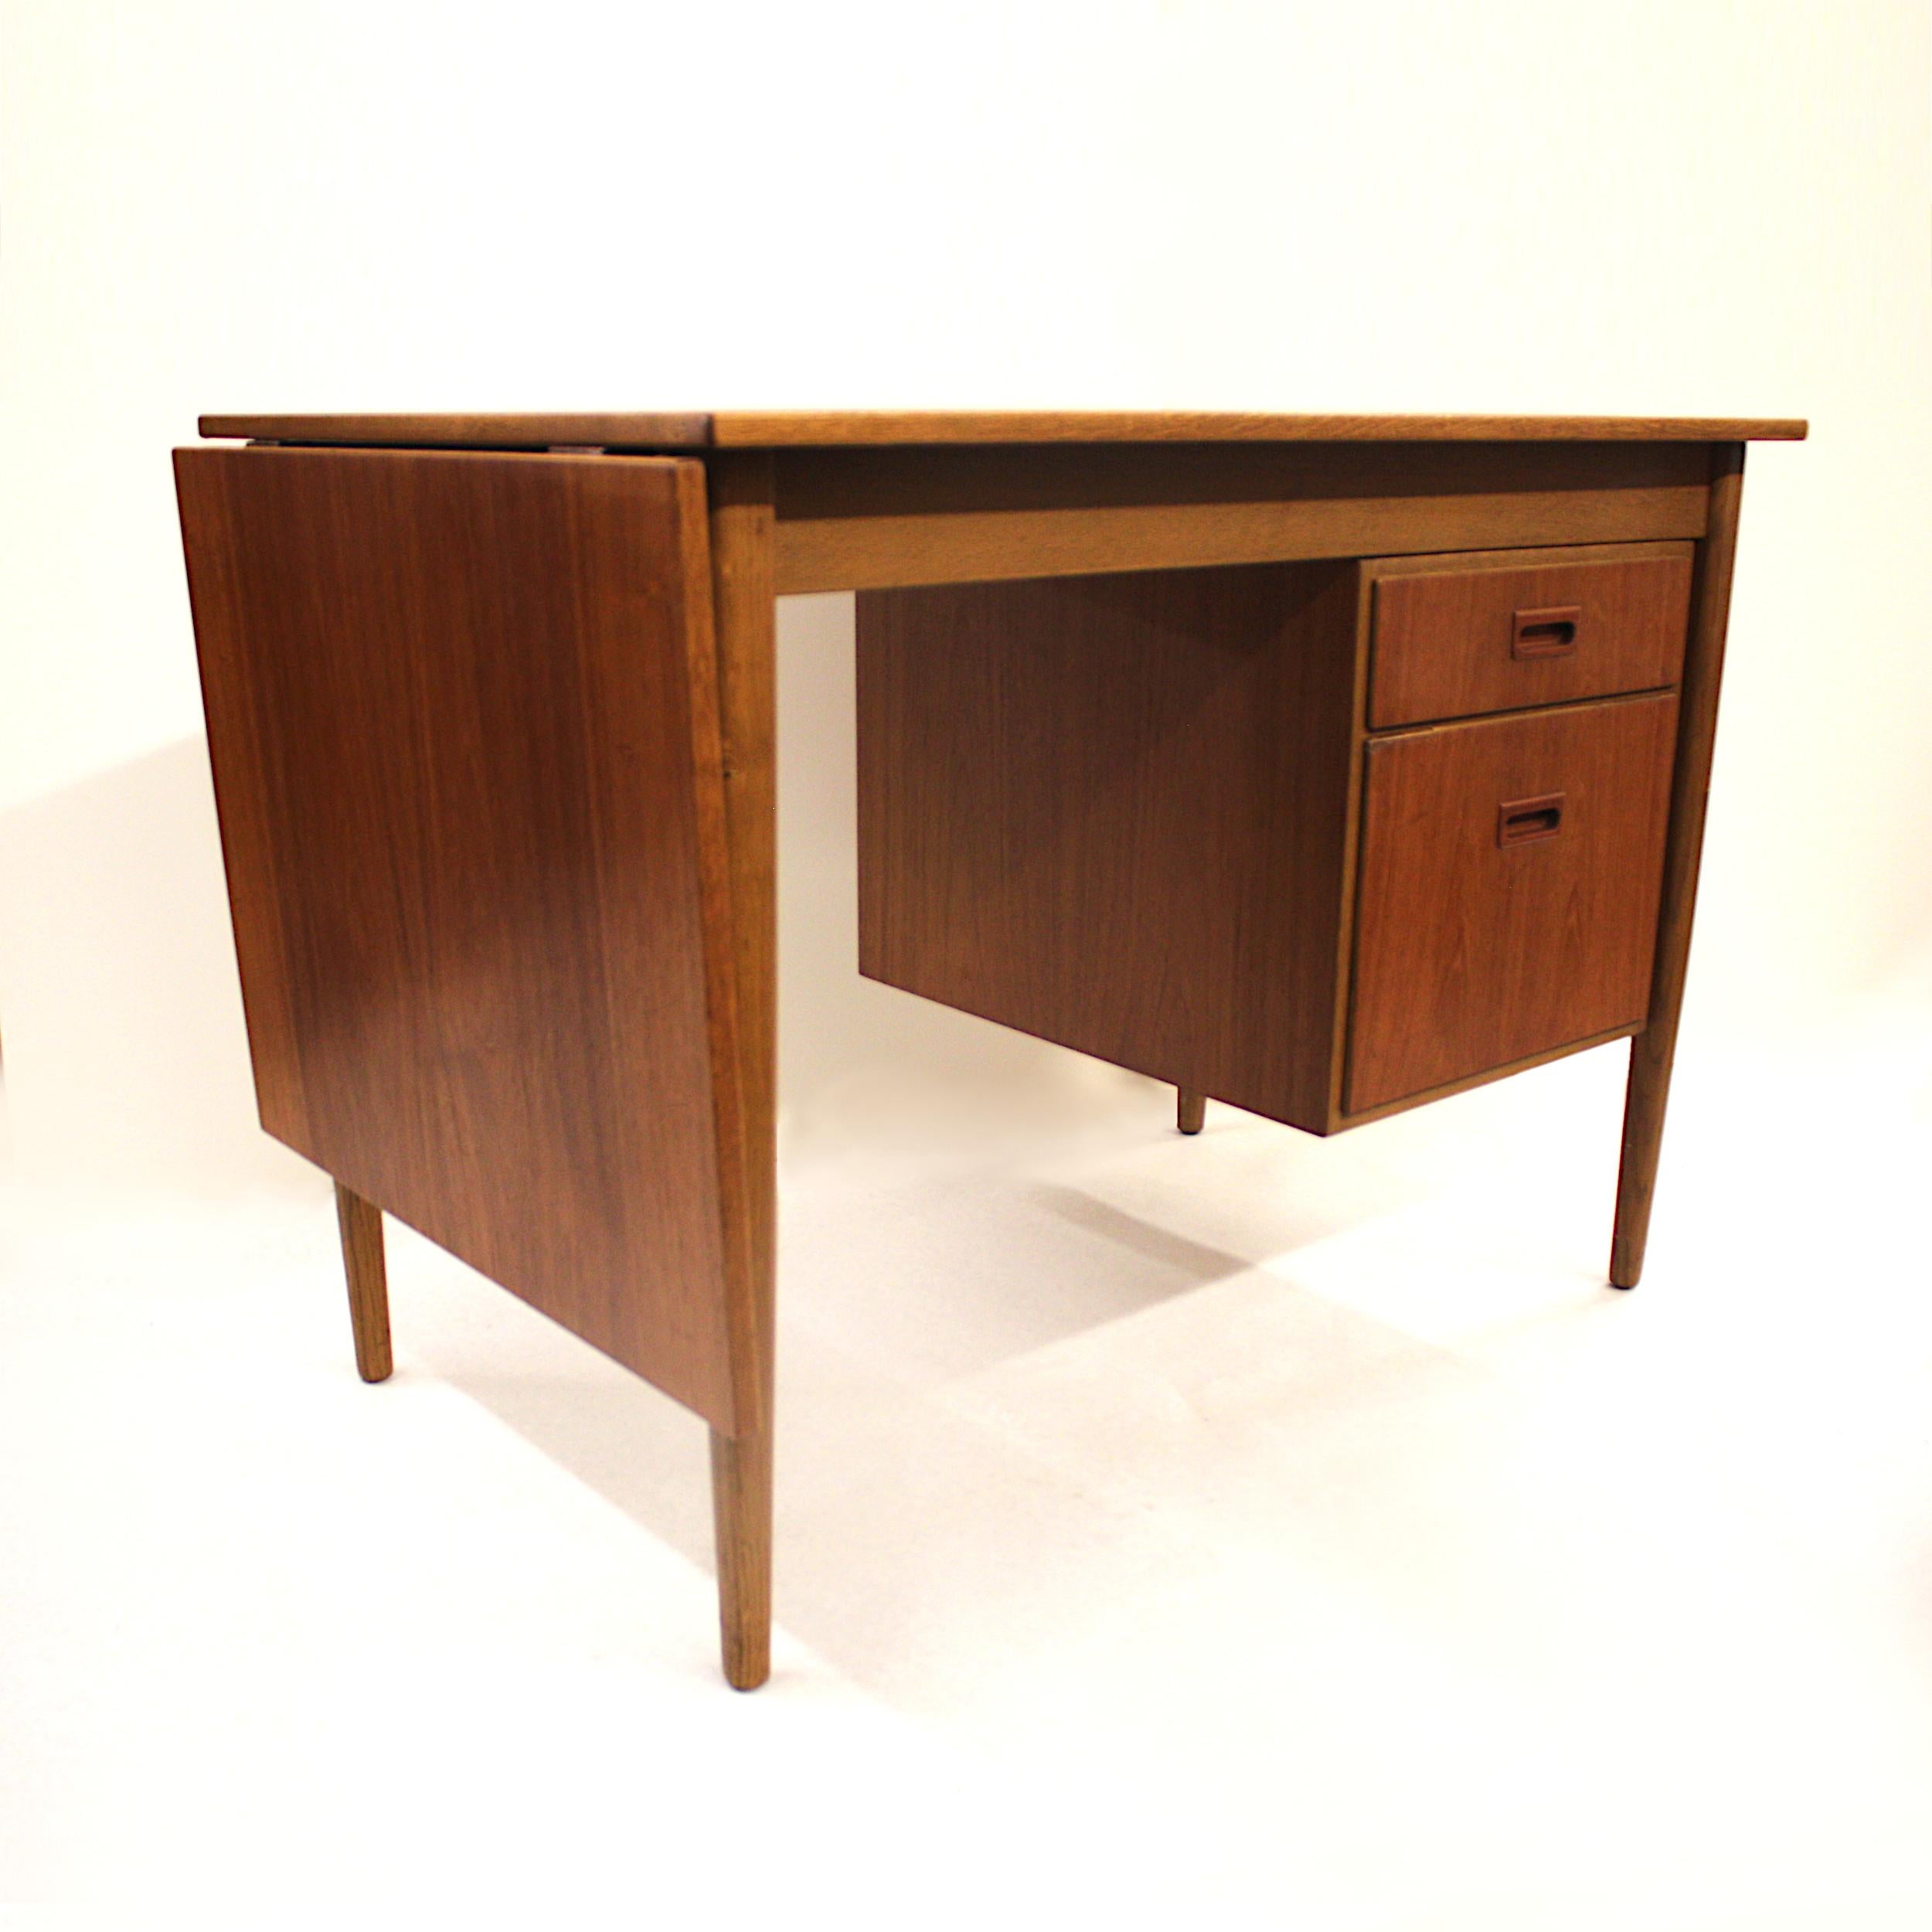 This nifty little desk was made in the 1960s by The Swedish furniture manufacturer Treman. Desk has a number of novel features including a sliding, drop-leaf top that extends the work surface from 41